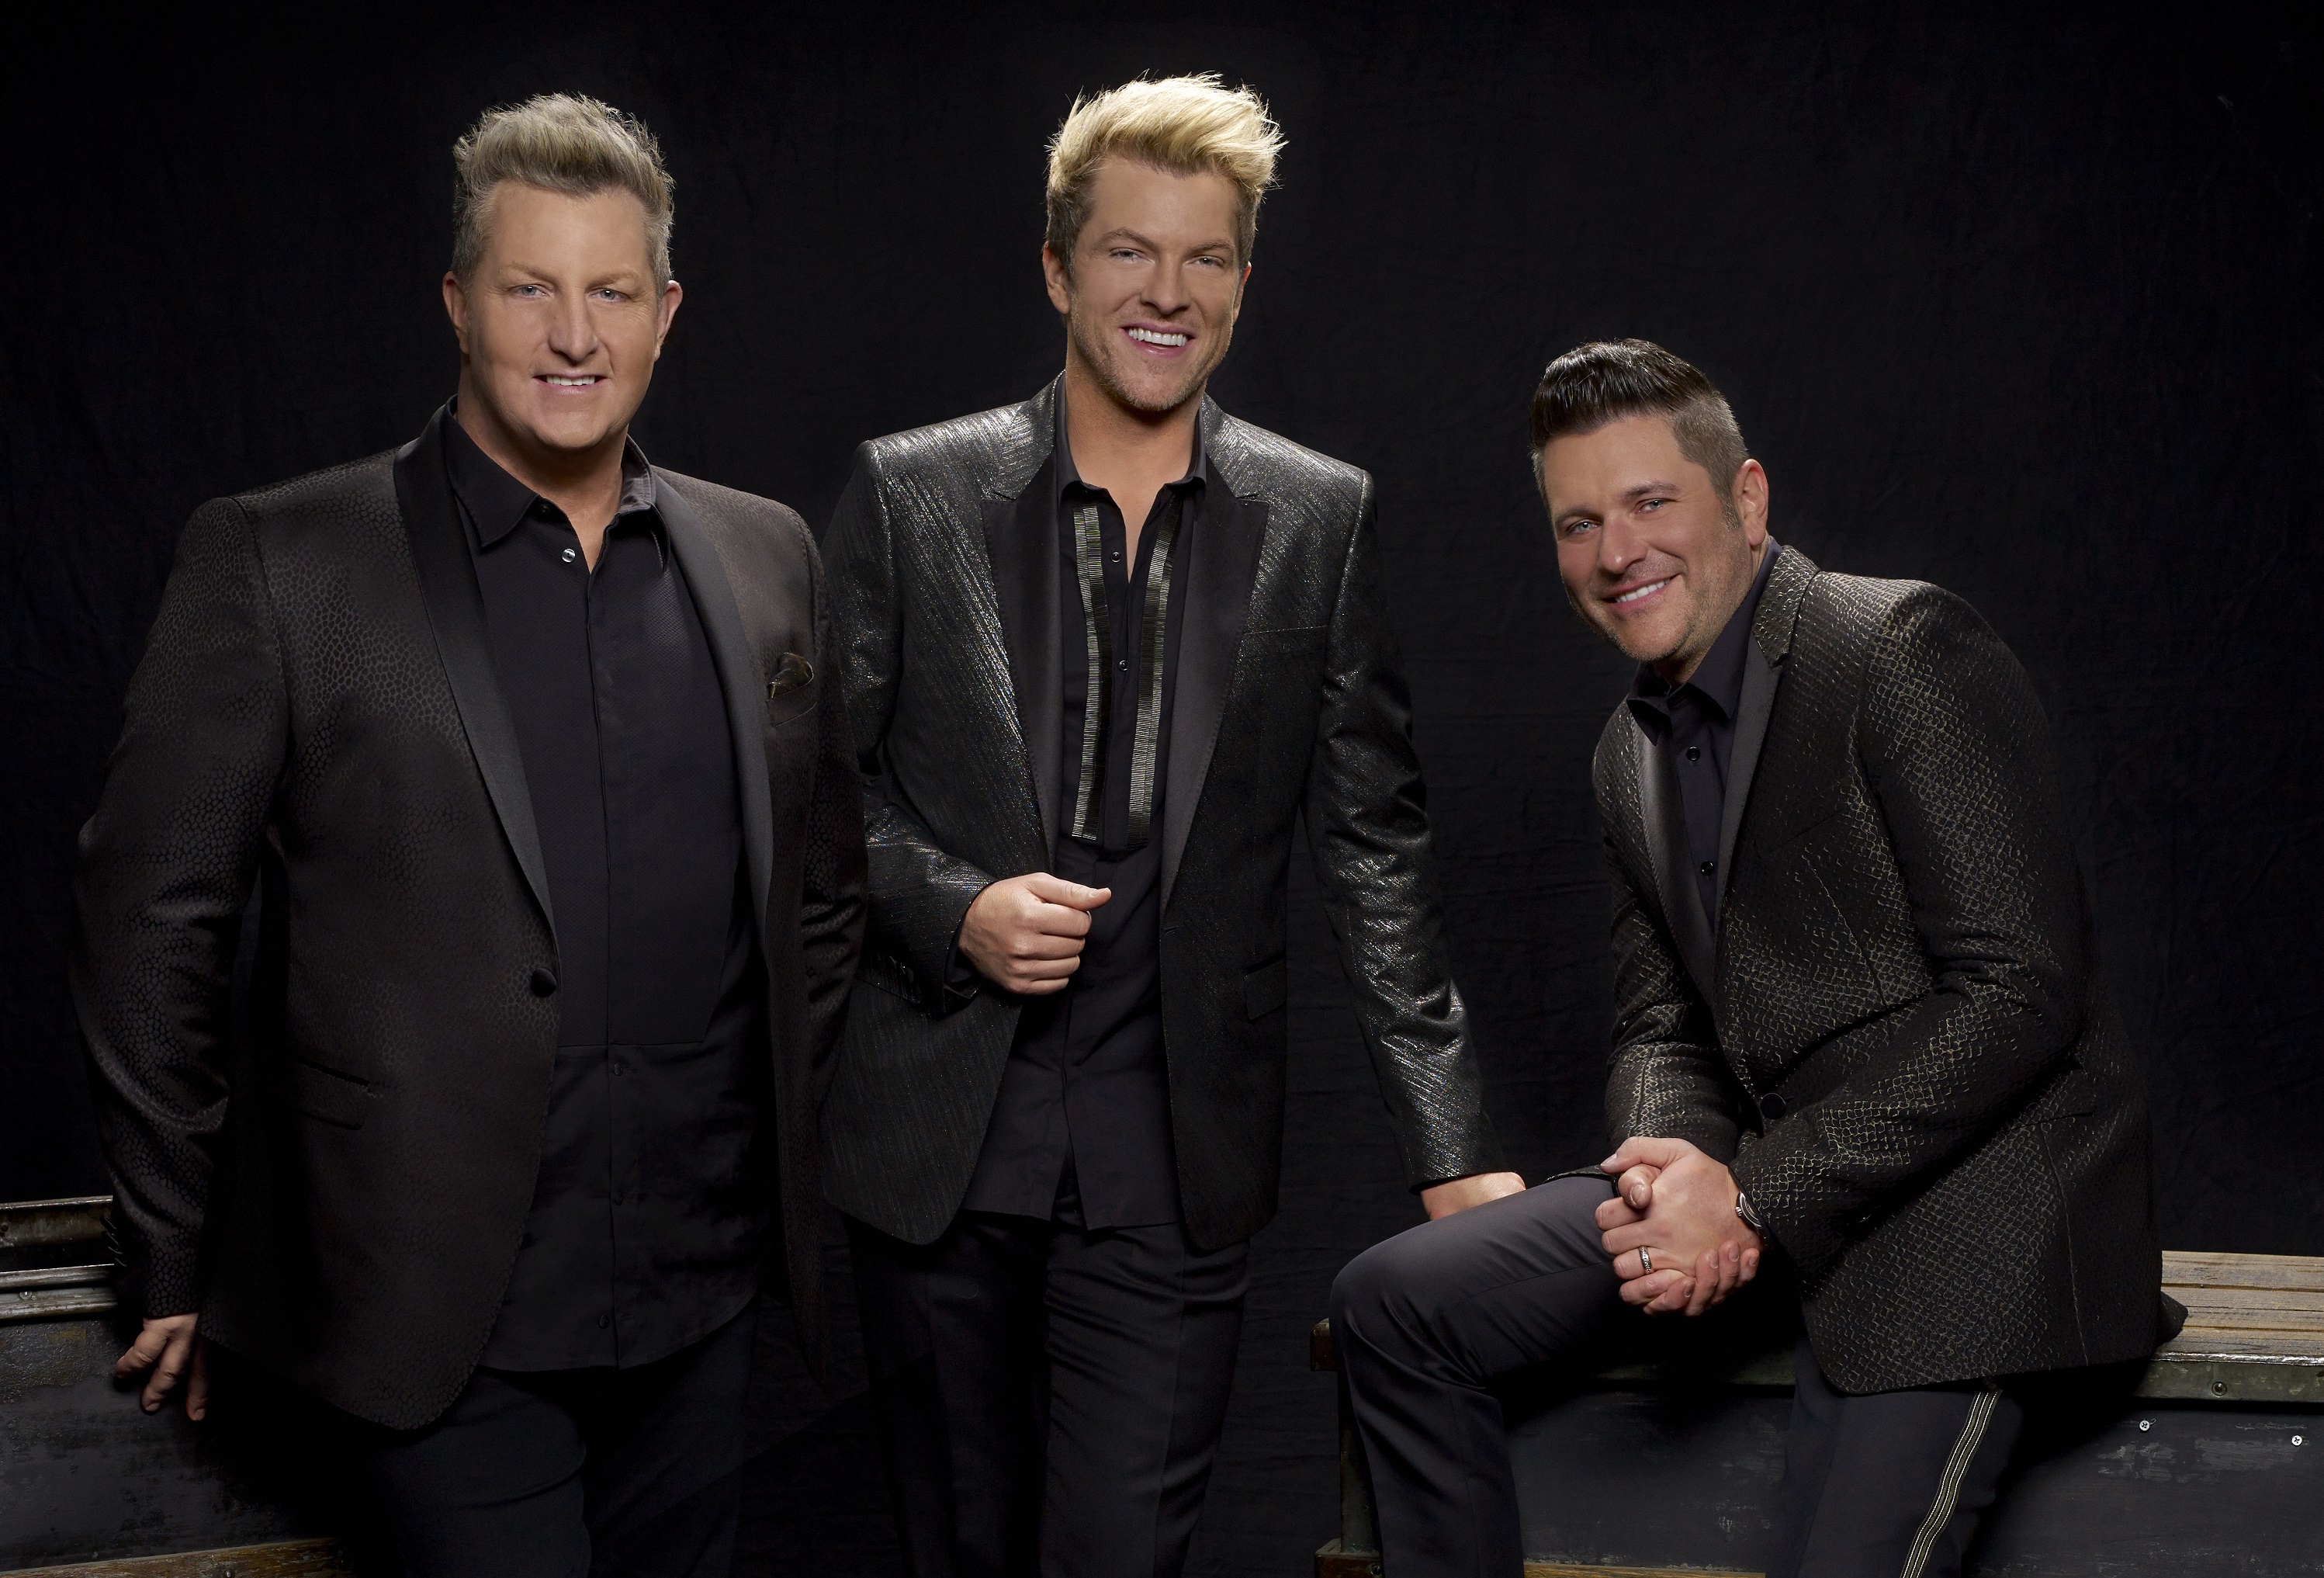 22 Of The Best Rascal Flatts Weddings Songs For Your Big Day